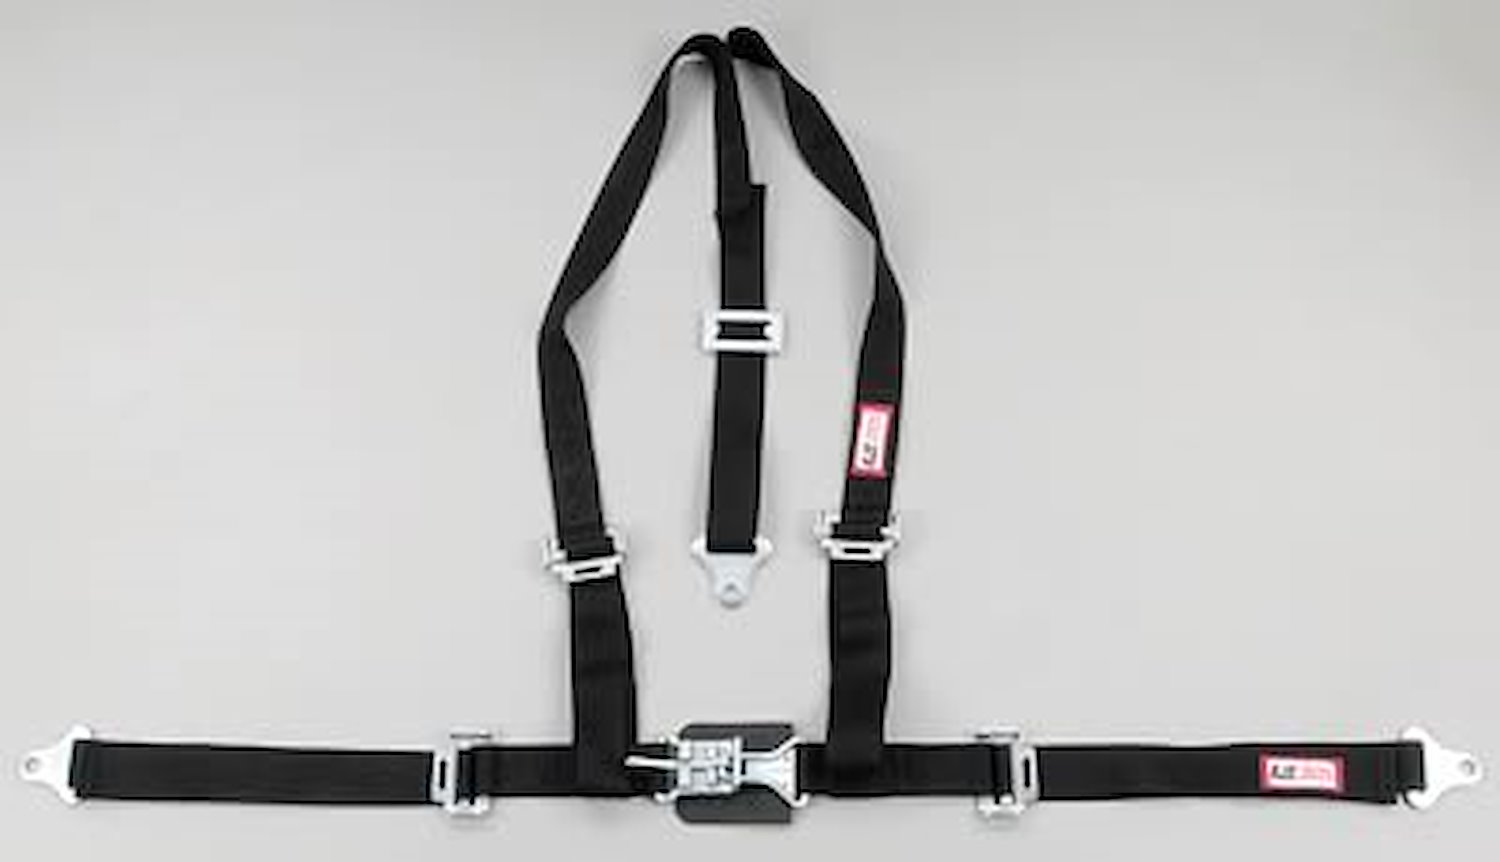 NON-SFI L&L HARNESS 3 PULL DOWN Lap Belt SEWN IN 2 S.H. Individual FLOOR Mount w/STERNUM STRAP ALL WRAP ENDS ORANGE